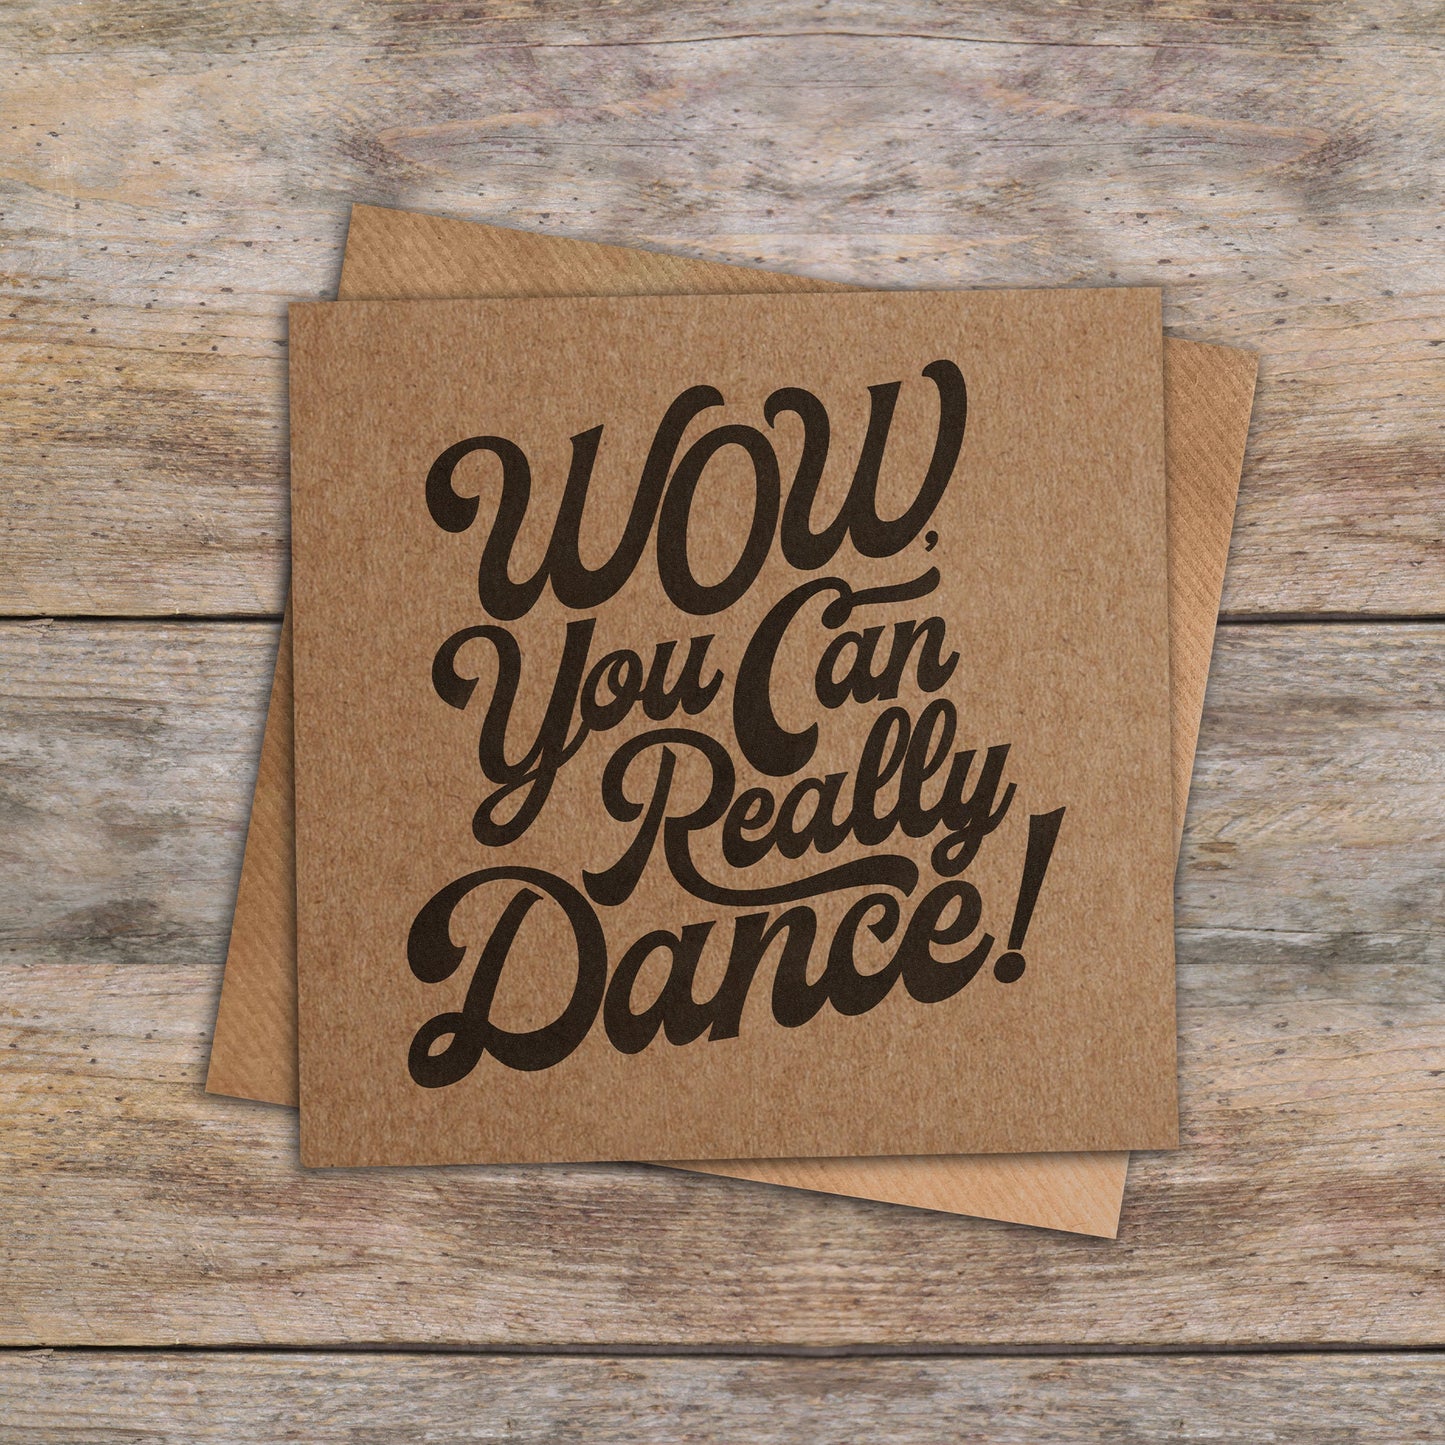 Wow, You Can Really Dance! Card. Tik Tok Cards. Funny Birthday Cards. Recycled Kraft or White Card. Send Direct Option.